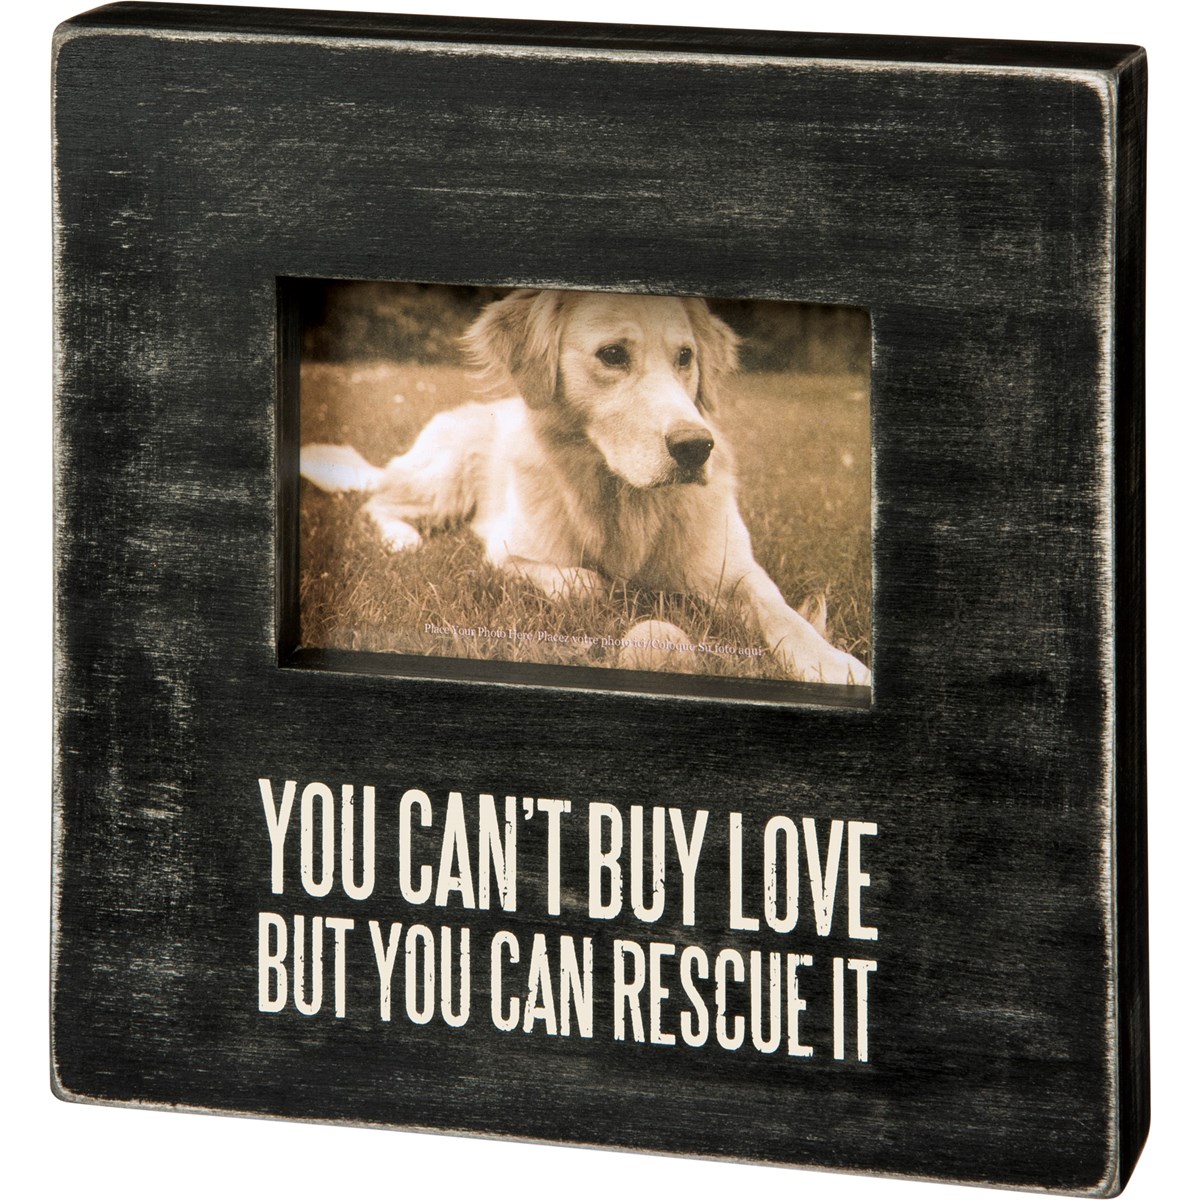 Rescue It Box Frame - Wood, Glass